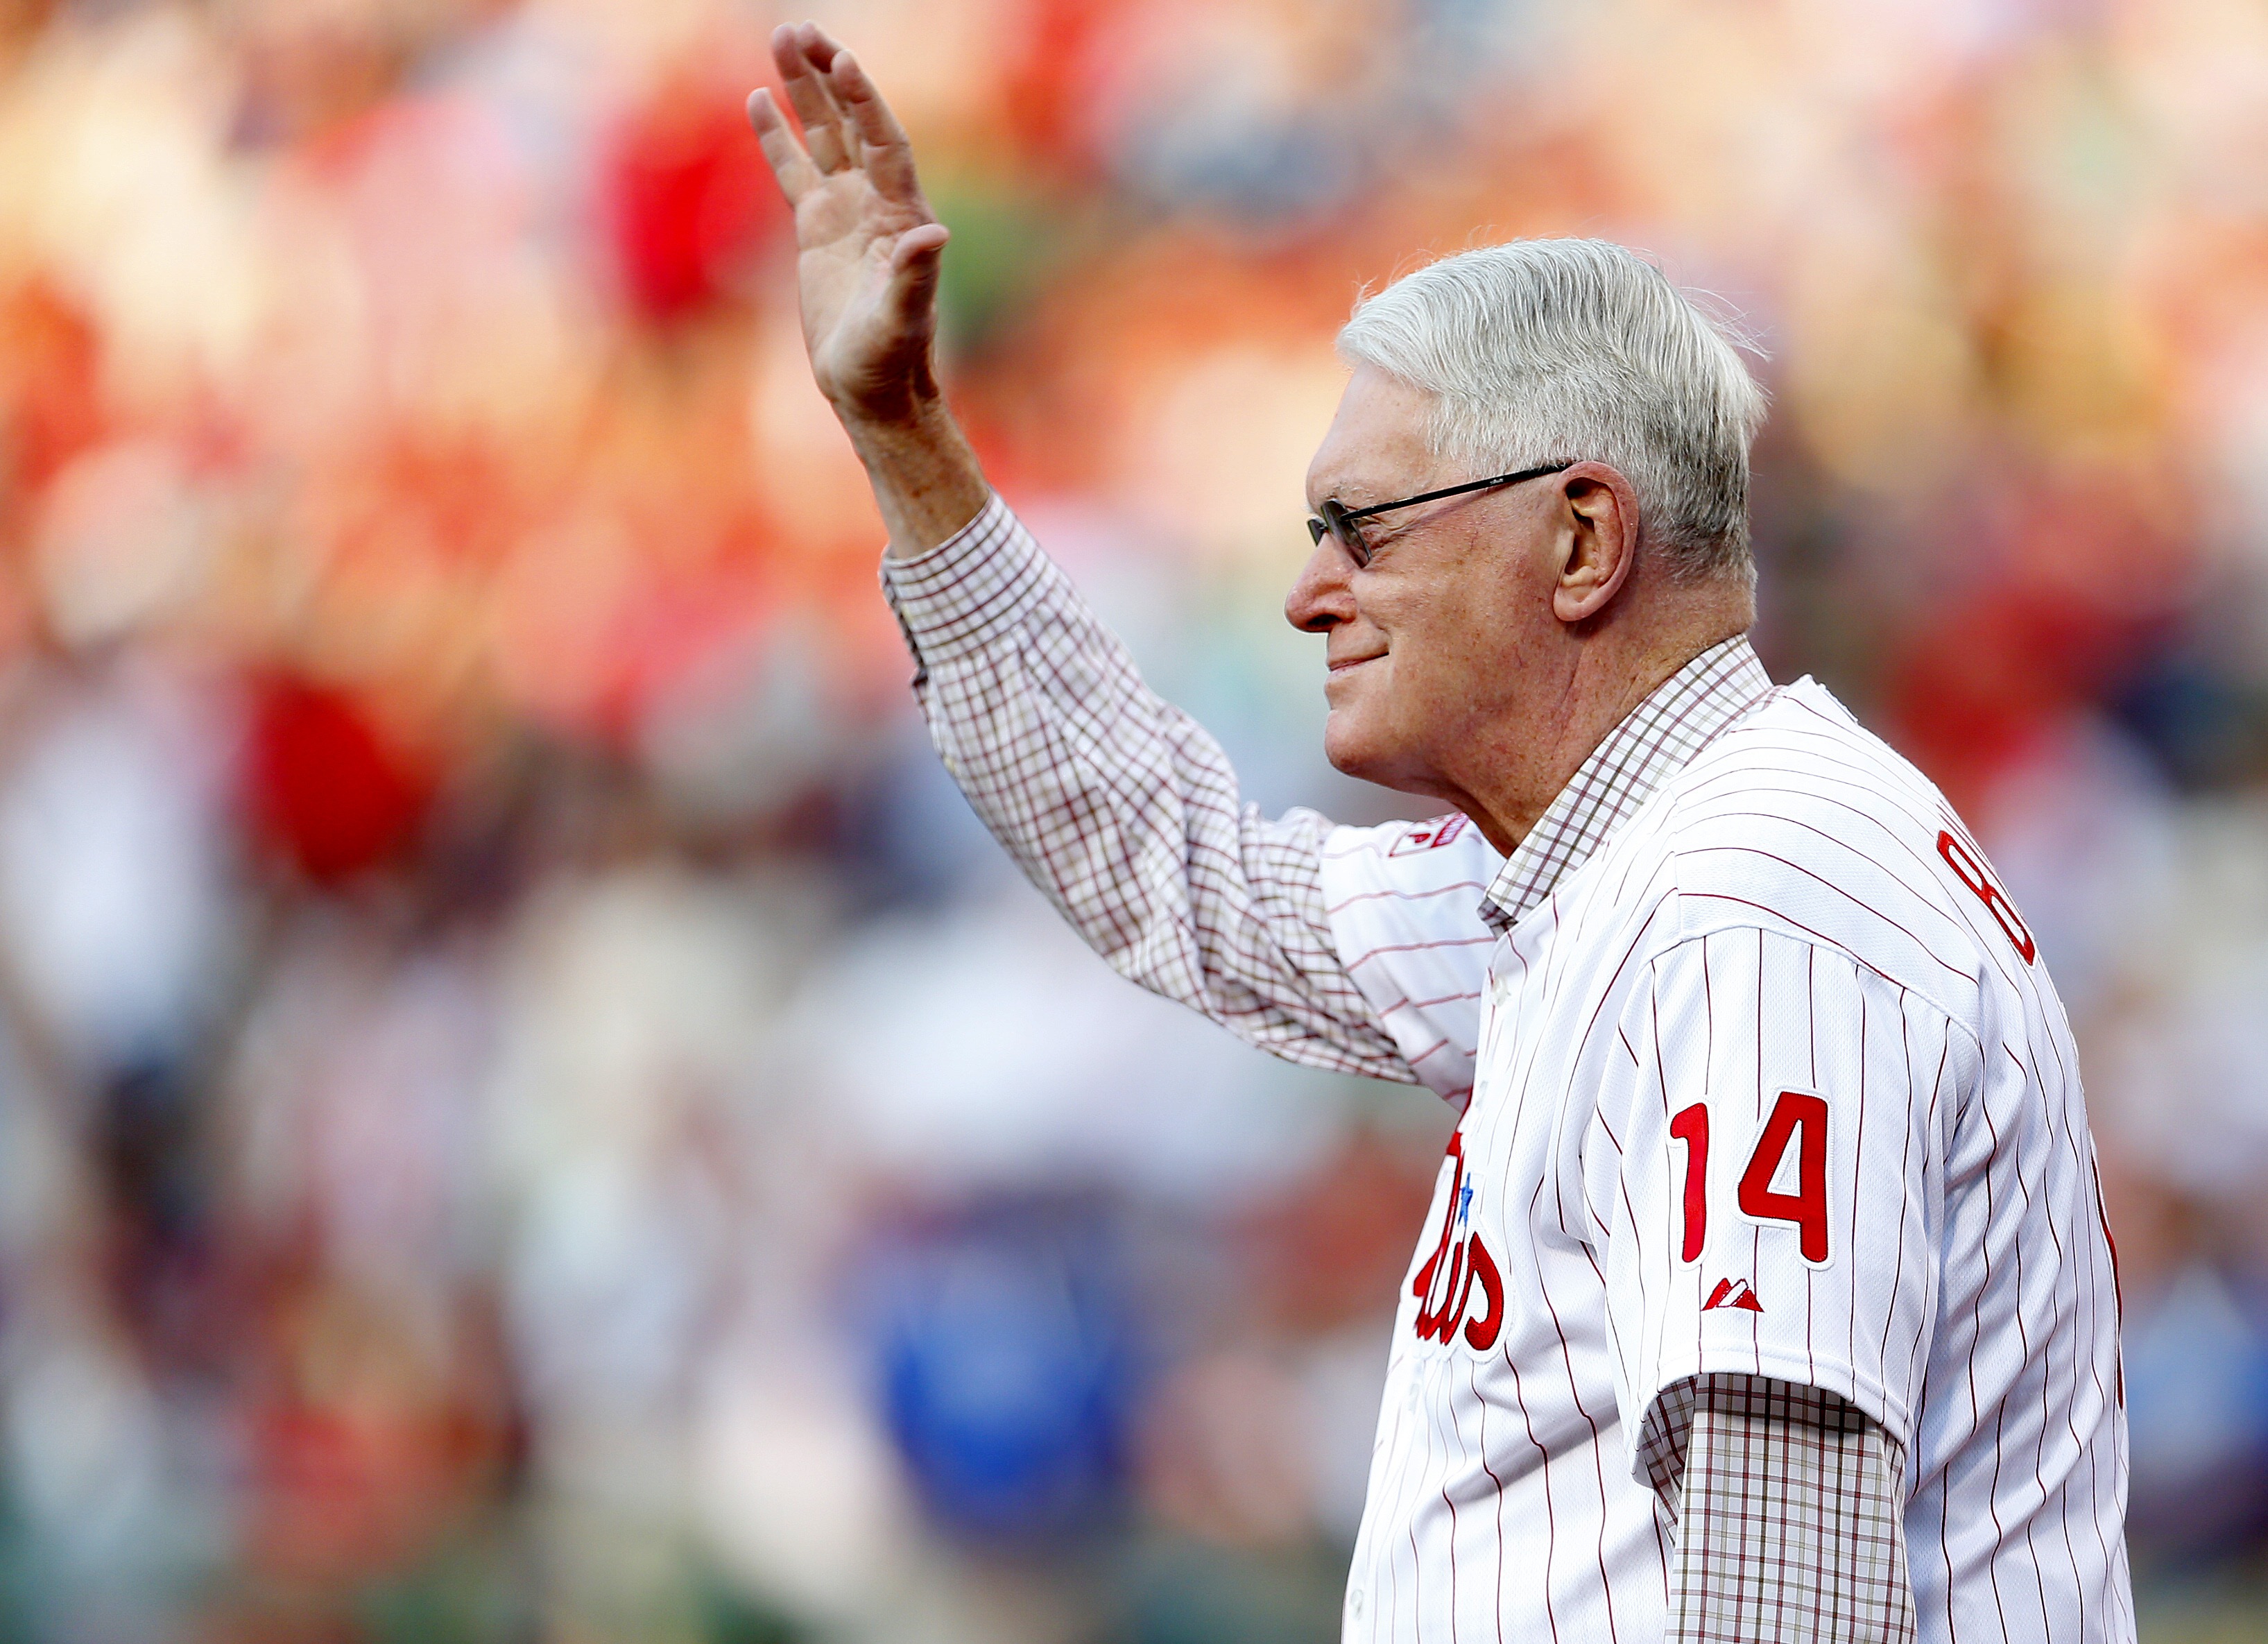 Jim Bunning is introduced during a ceremony at Citizens Bank Park on Aug. 9, 2014 in Philadelphia, PA. (Rich Schultz—Getty Images)